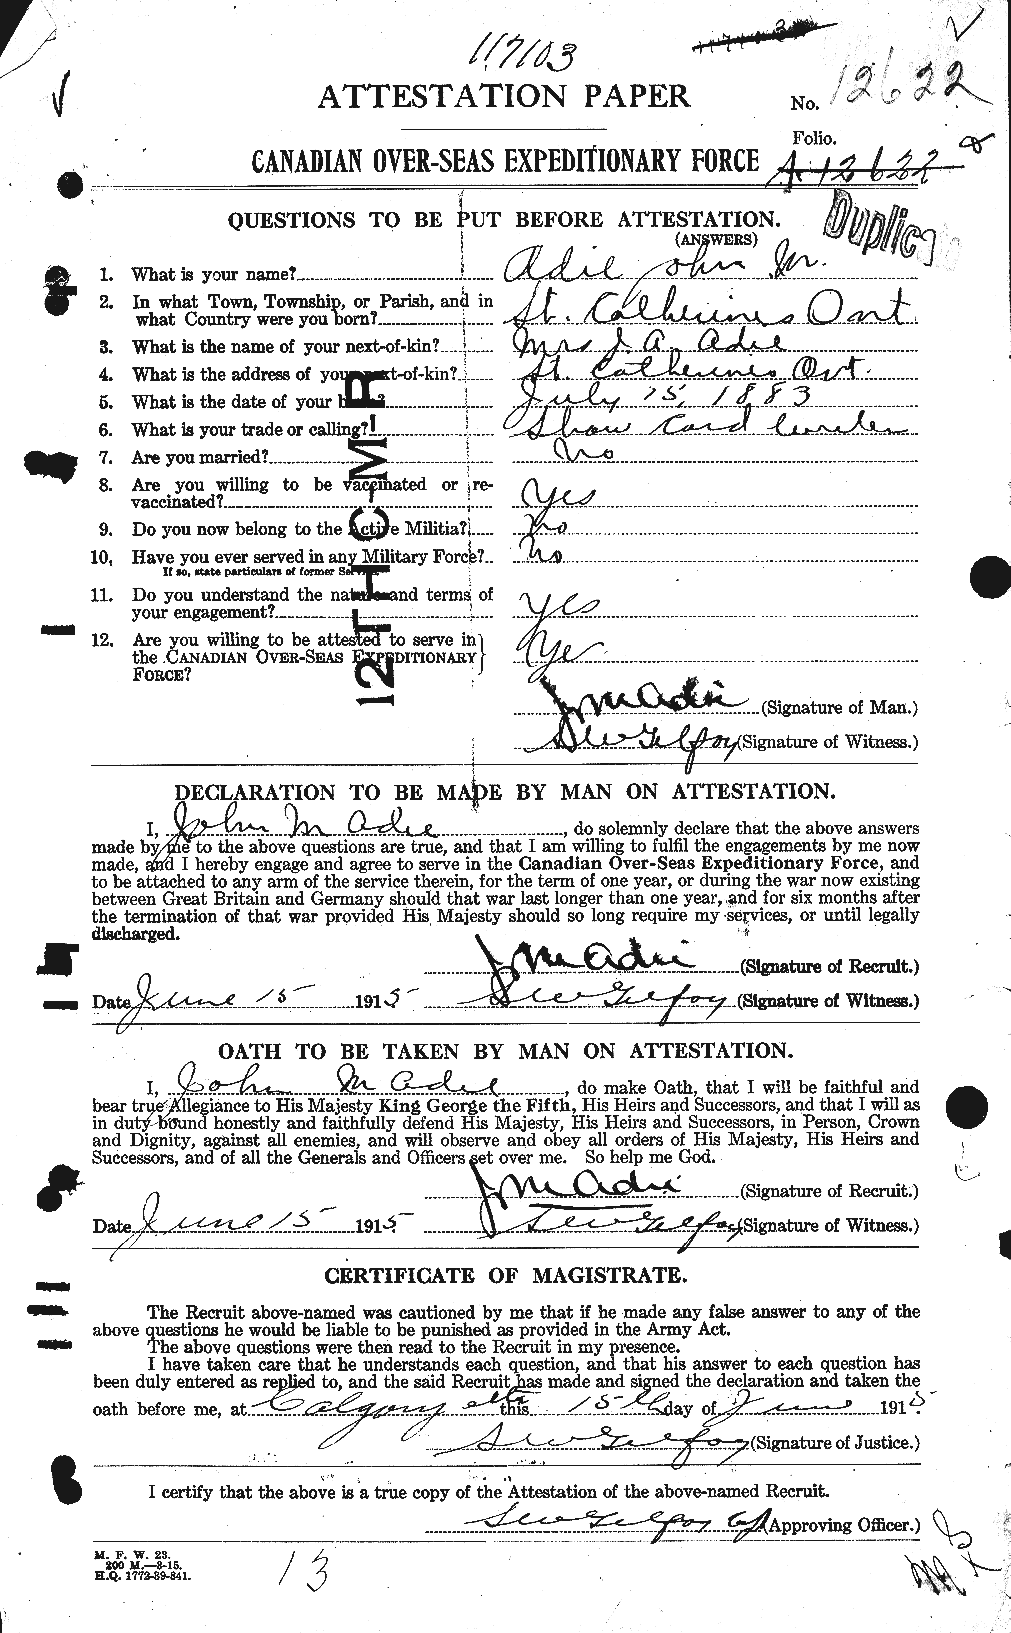 Personnel Records of the First World War - CEF 202819a